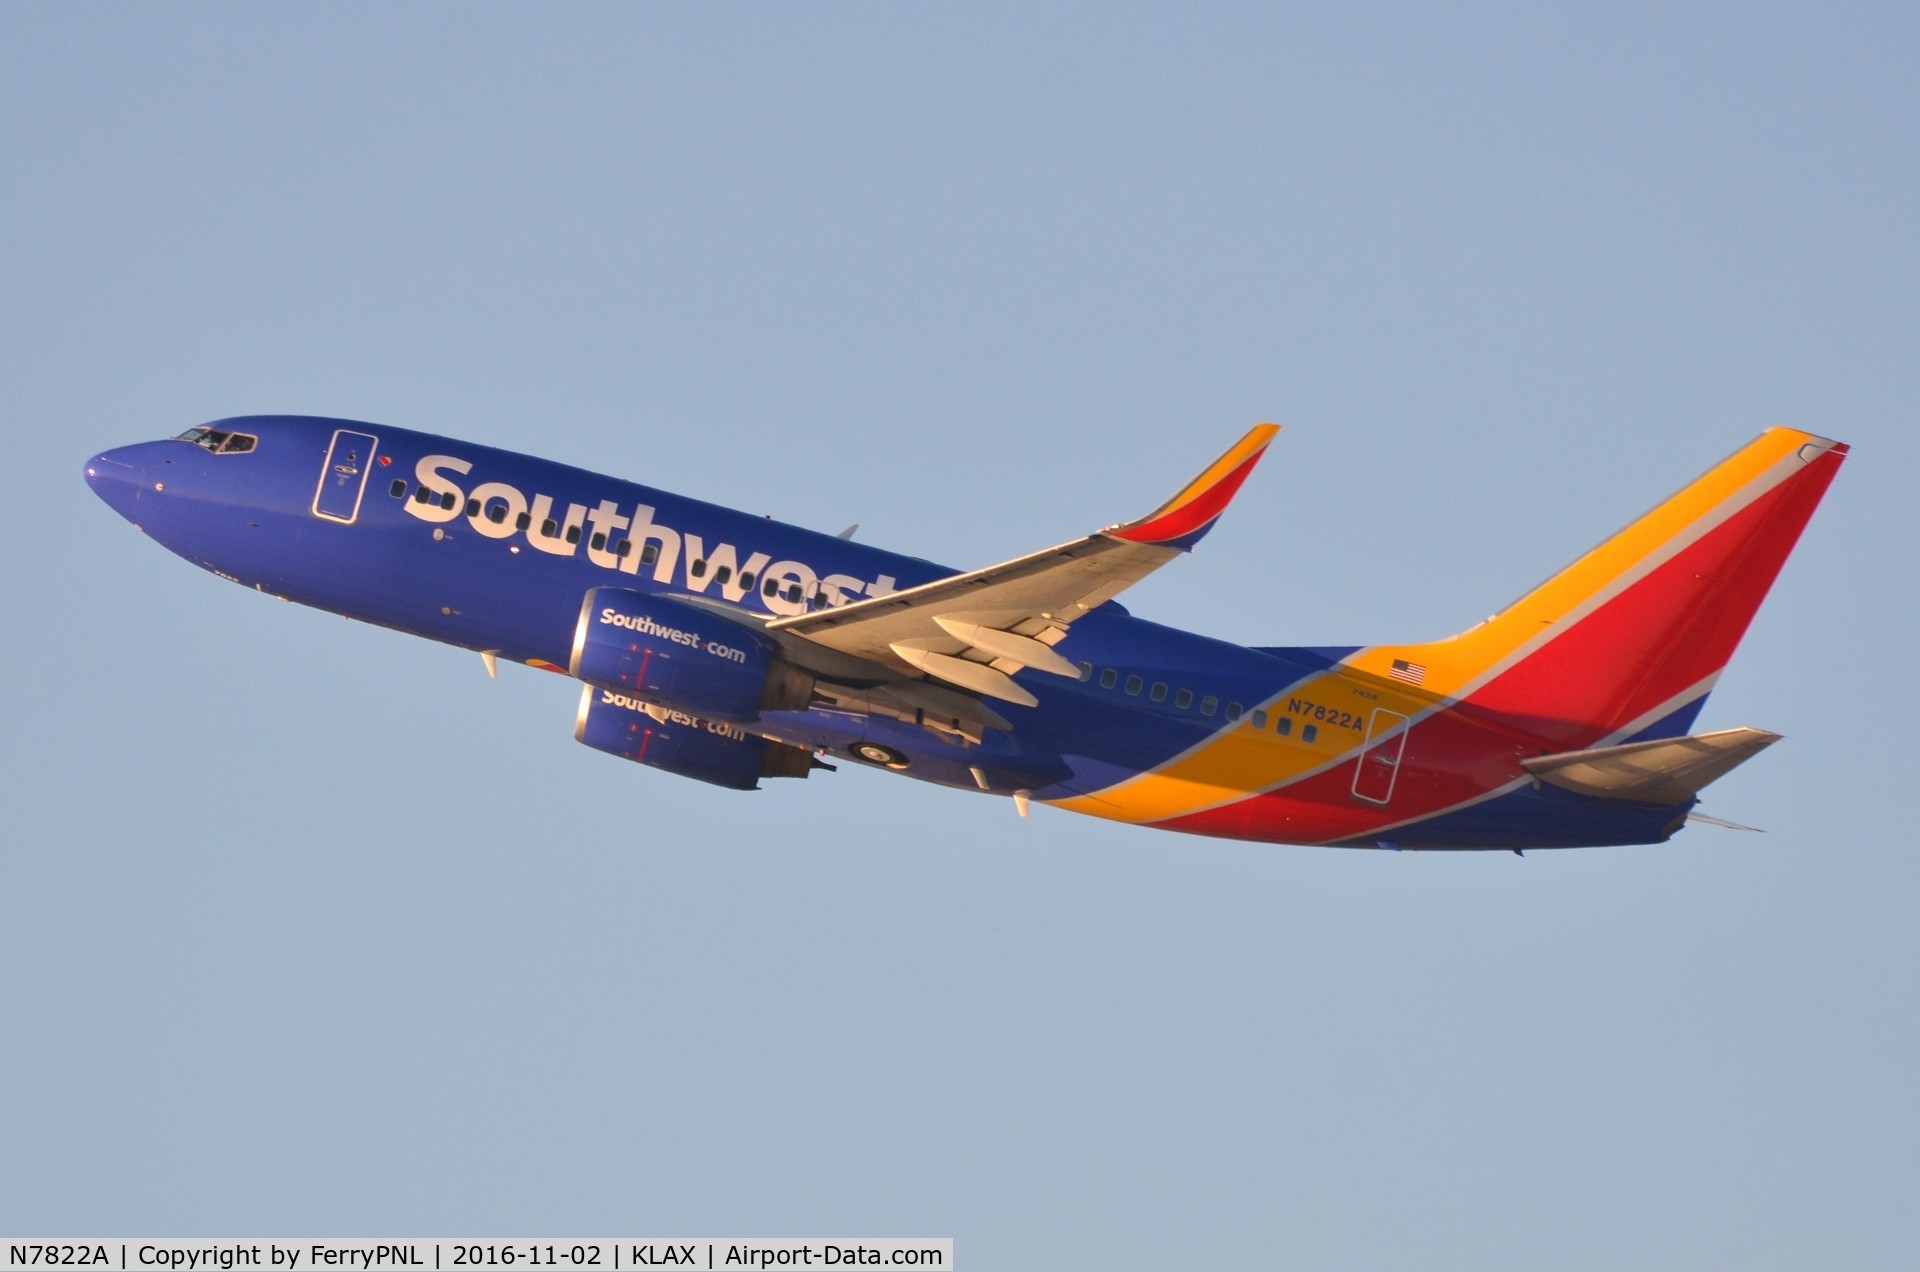 N7822A, 2001 Boeing 737-76N C/N 32596, Southwest B737 operated in China before WN acquired it.